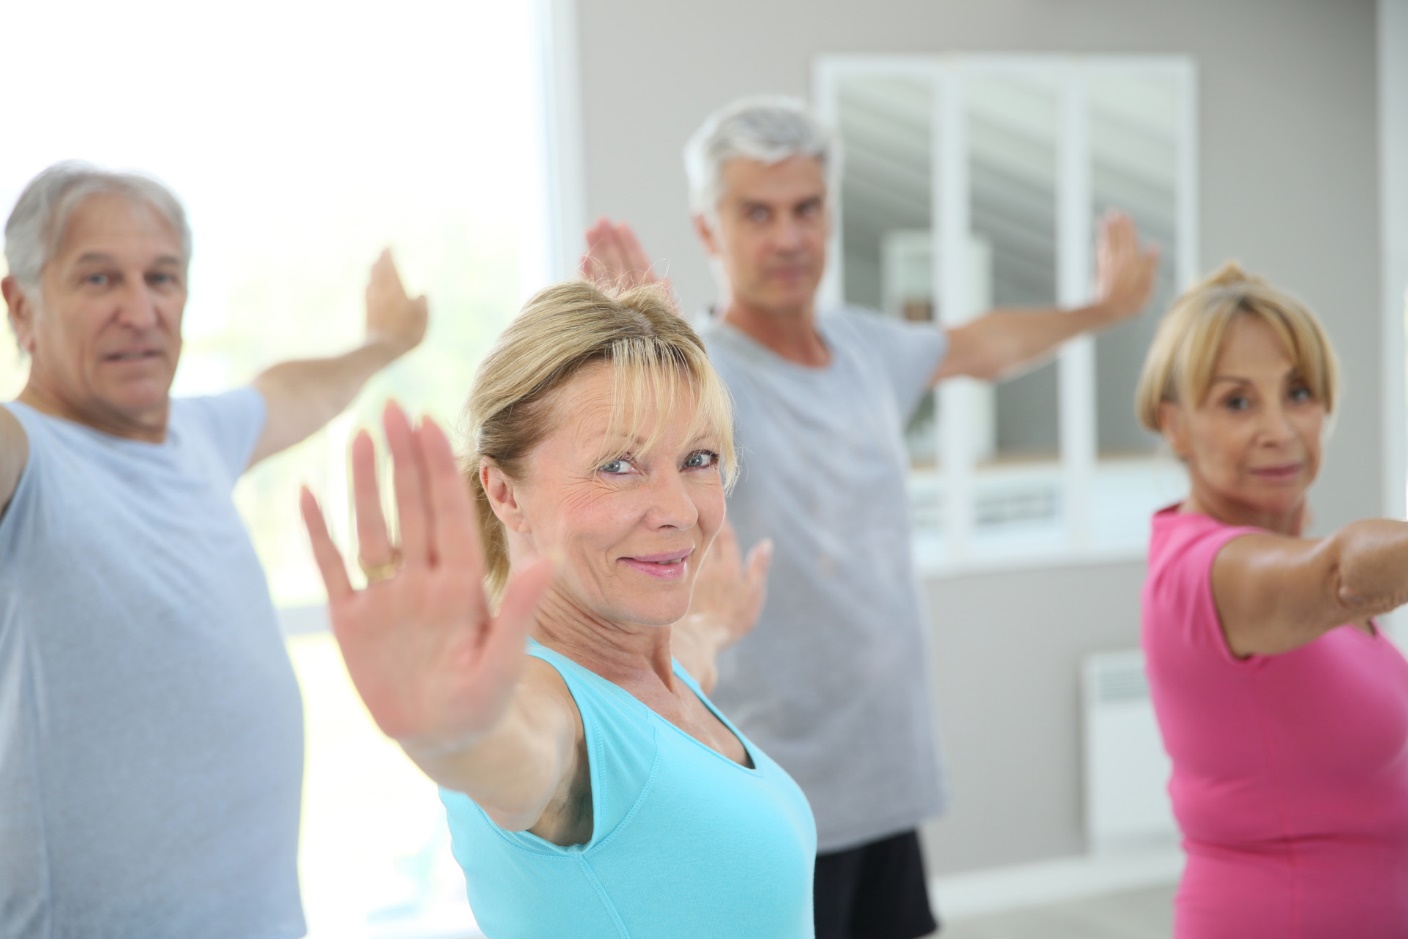 Exercise for seniors can be more fun when done in groups